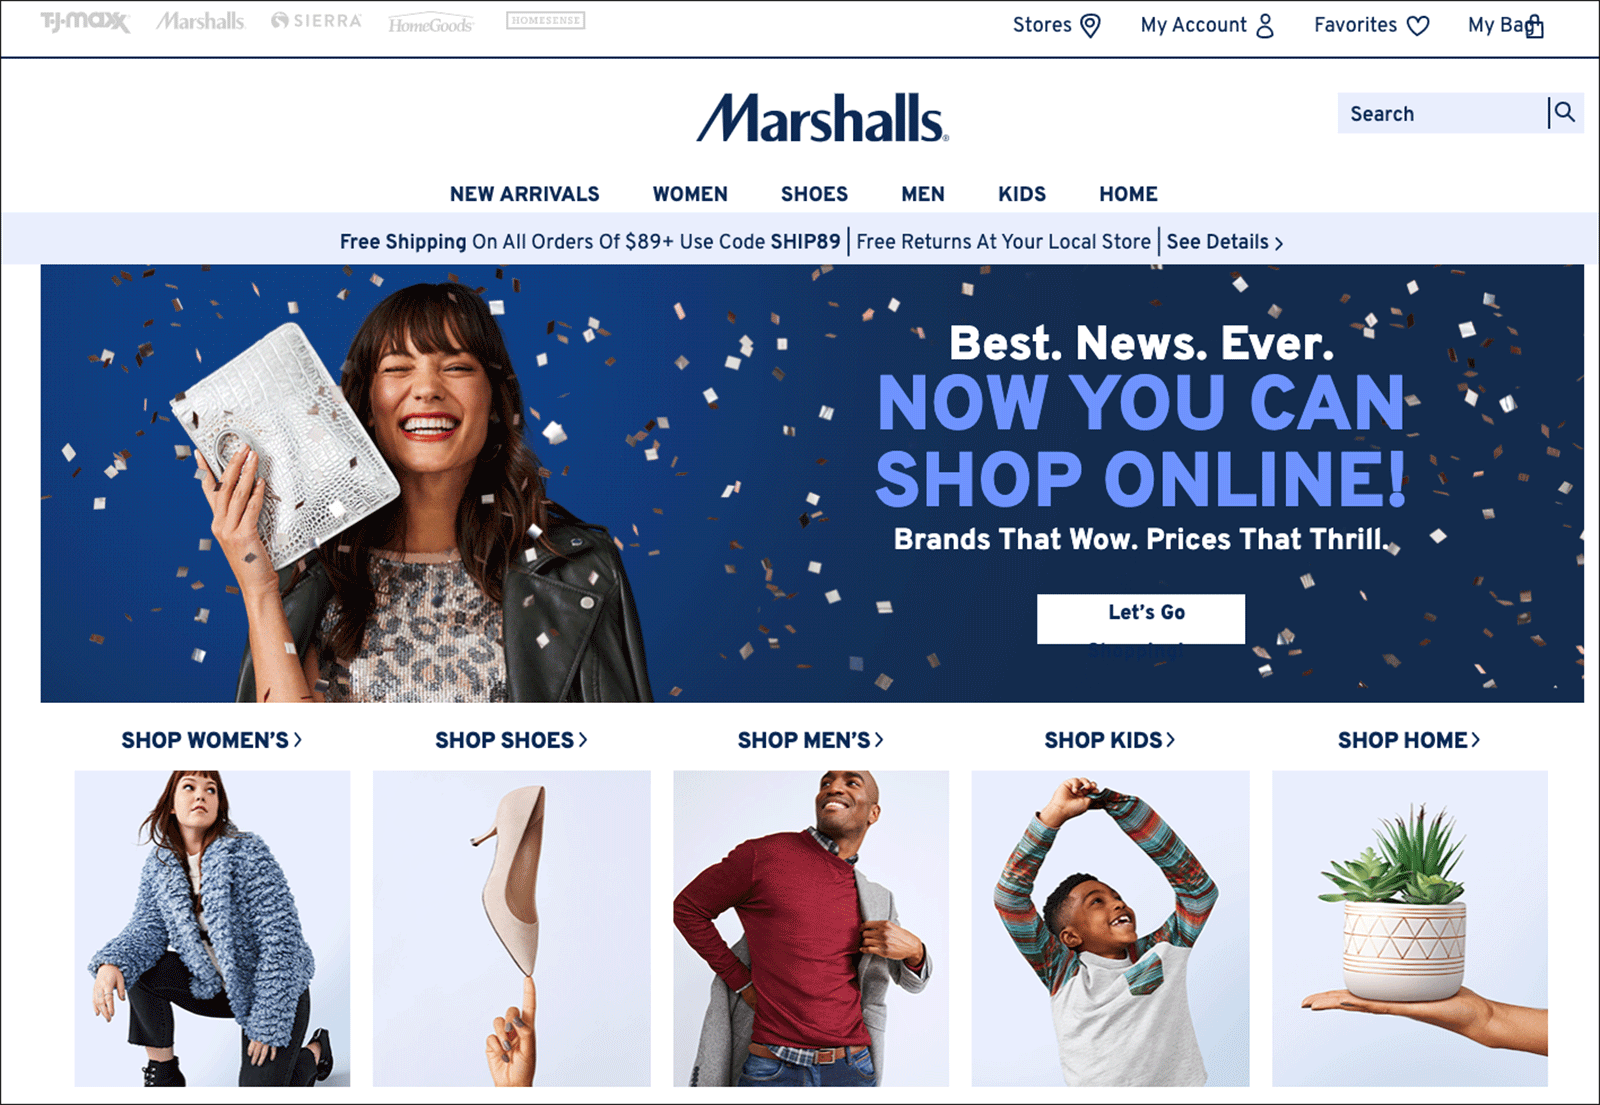 Marshalls launched online shopping!